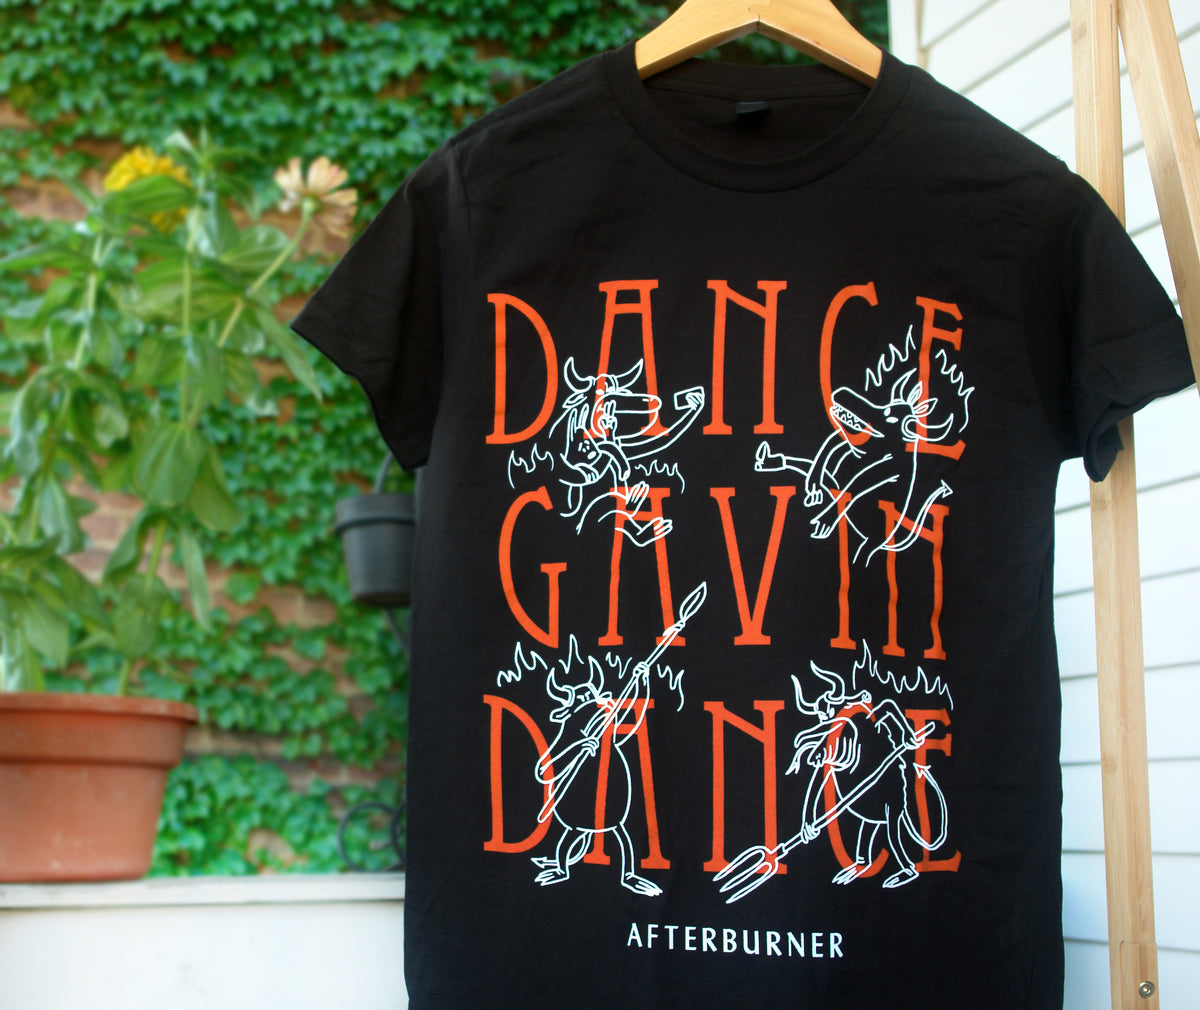 hanging black tee shirt in front of green leaves with full chest print that says dance gavin dance in stacked orange print and has four white outlined characters dispersed around and says afterburner on the bottom